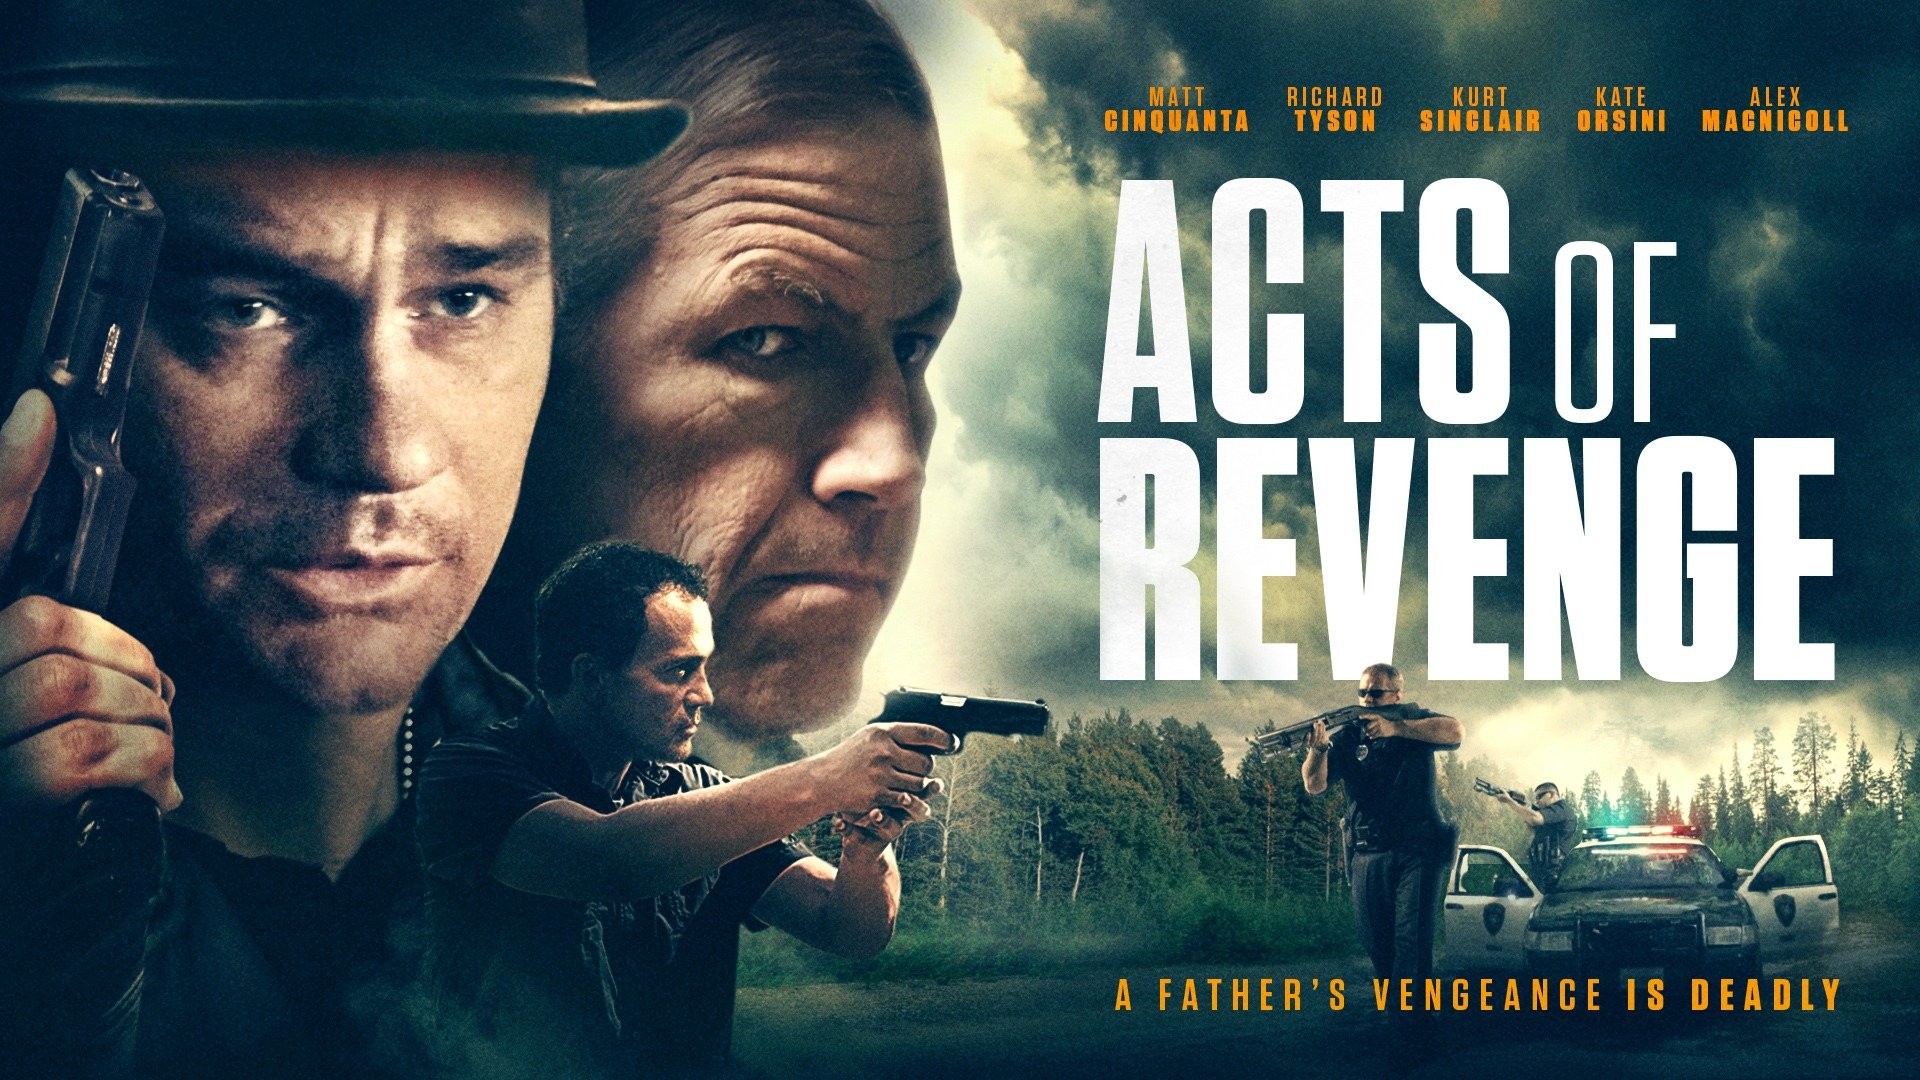 Acts of Vengeance - Rotten Tomatoes